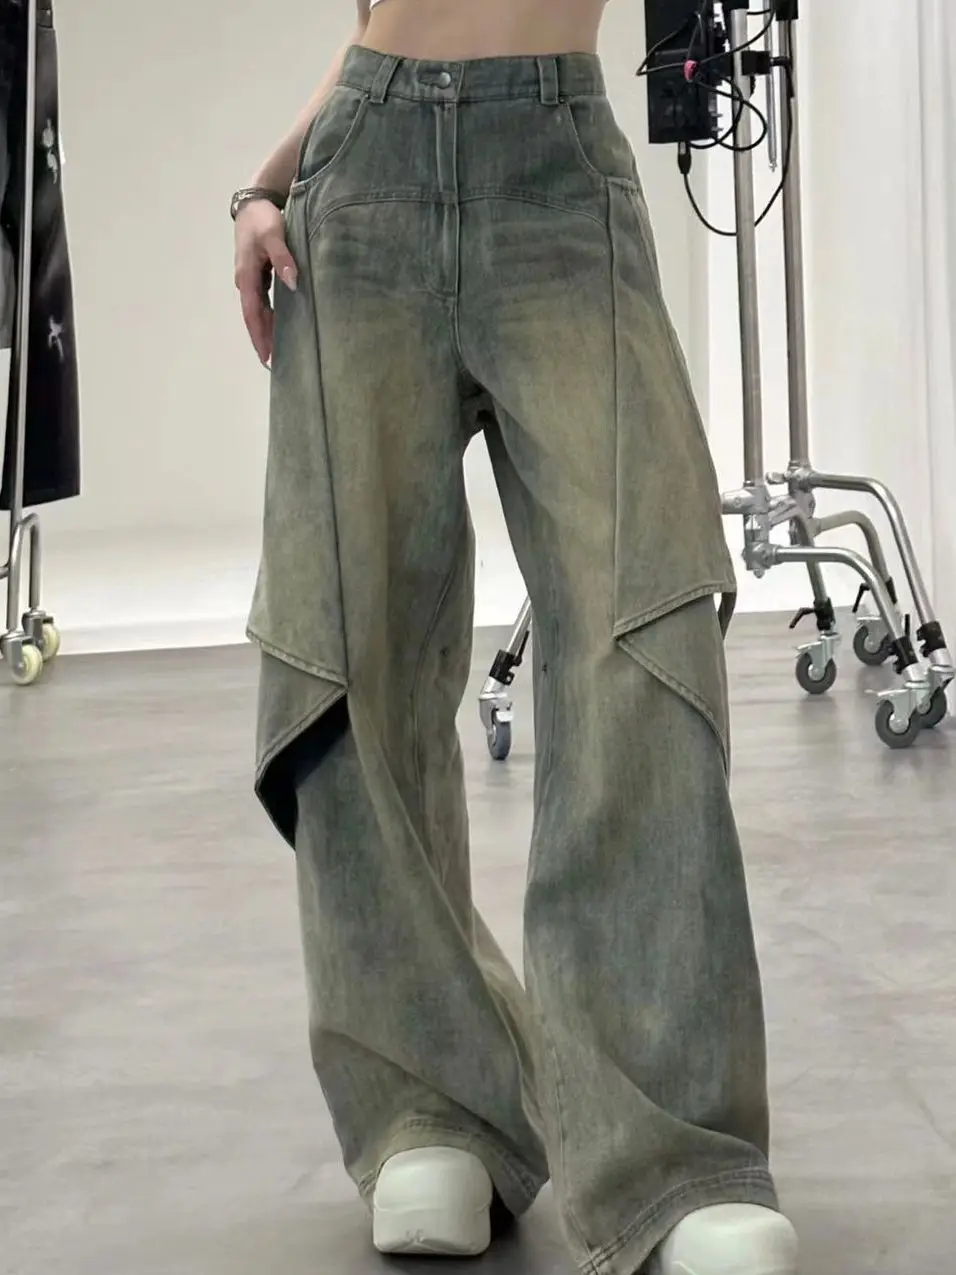 

New Vintage Distressed Blue Washed Button Flared Jeans Women's High Waist Straight Loose Punk Style Wide Leg Drape Long Trousers